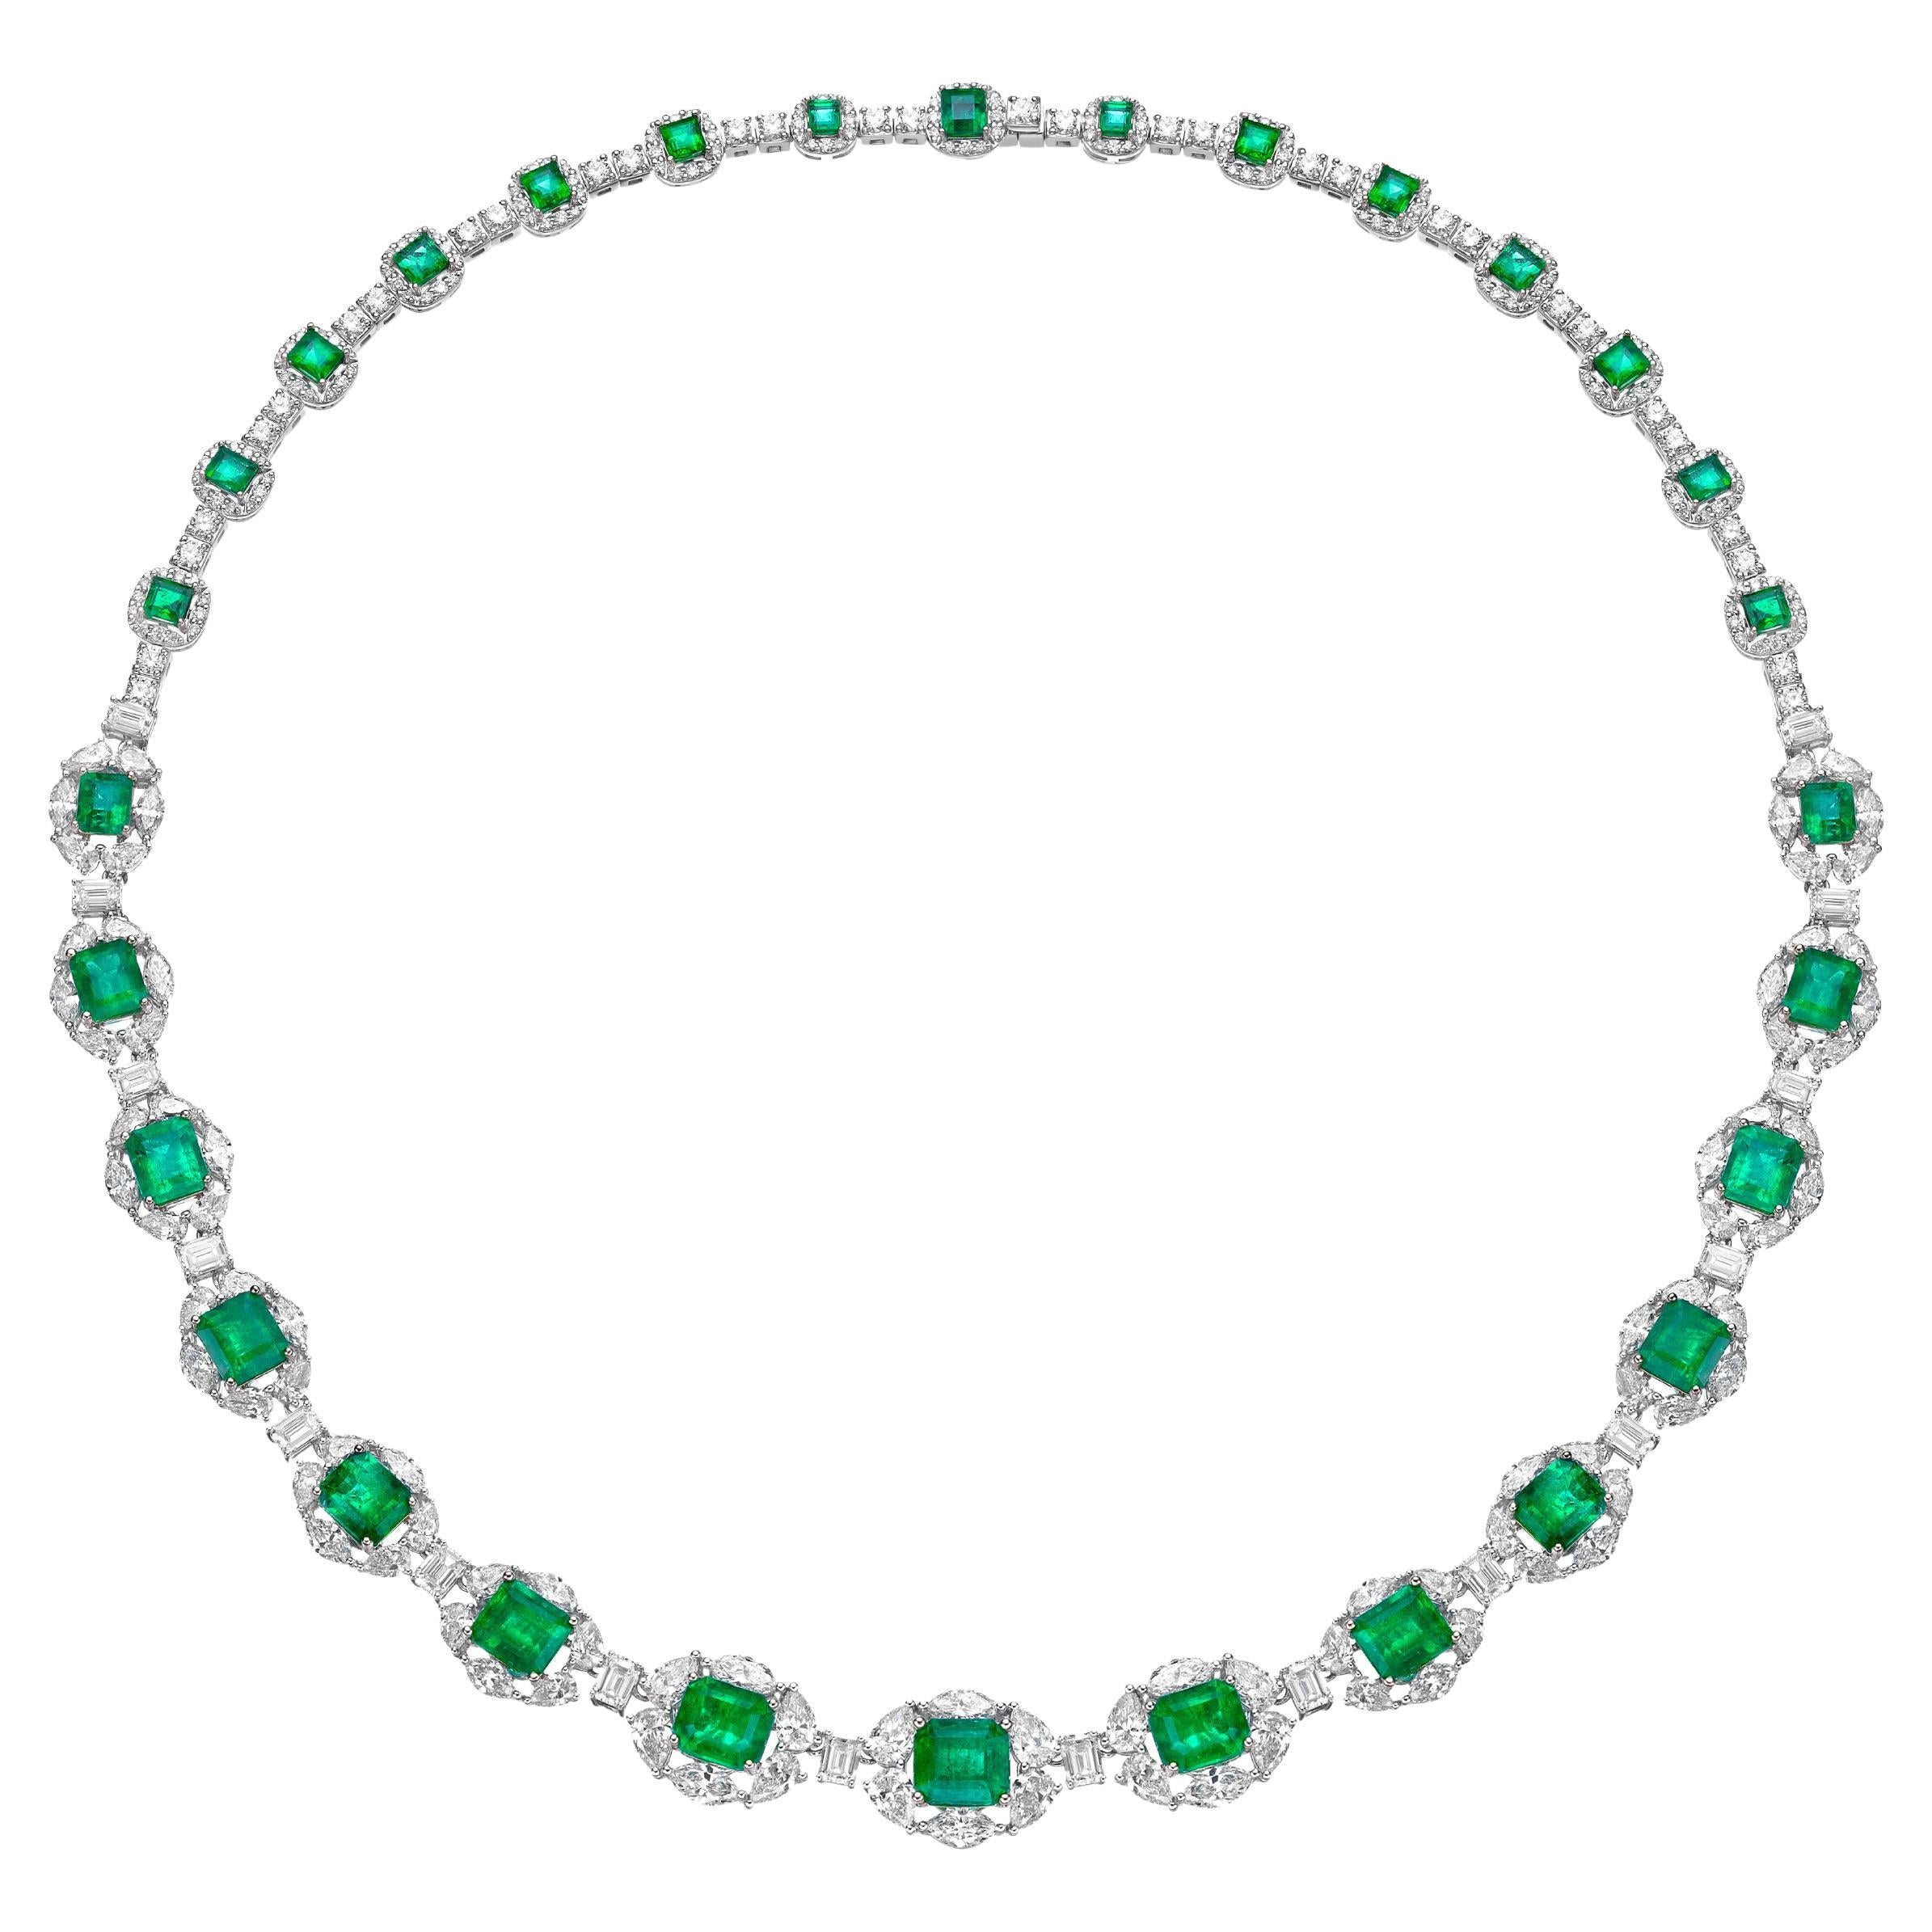 16.63 Carat Emerald Necklace in 18KWYG with White Diamond. For Sale